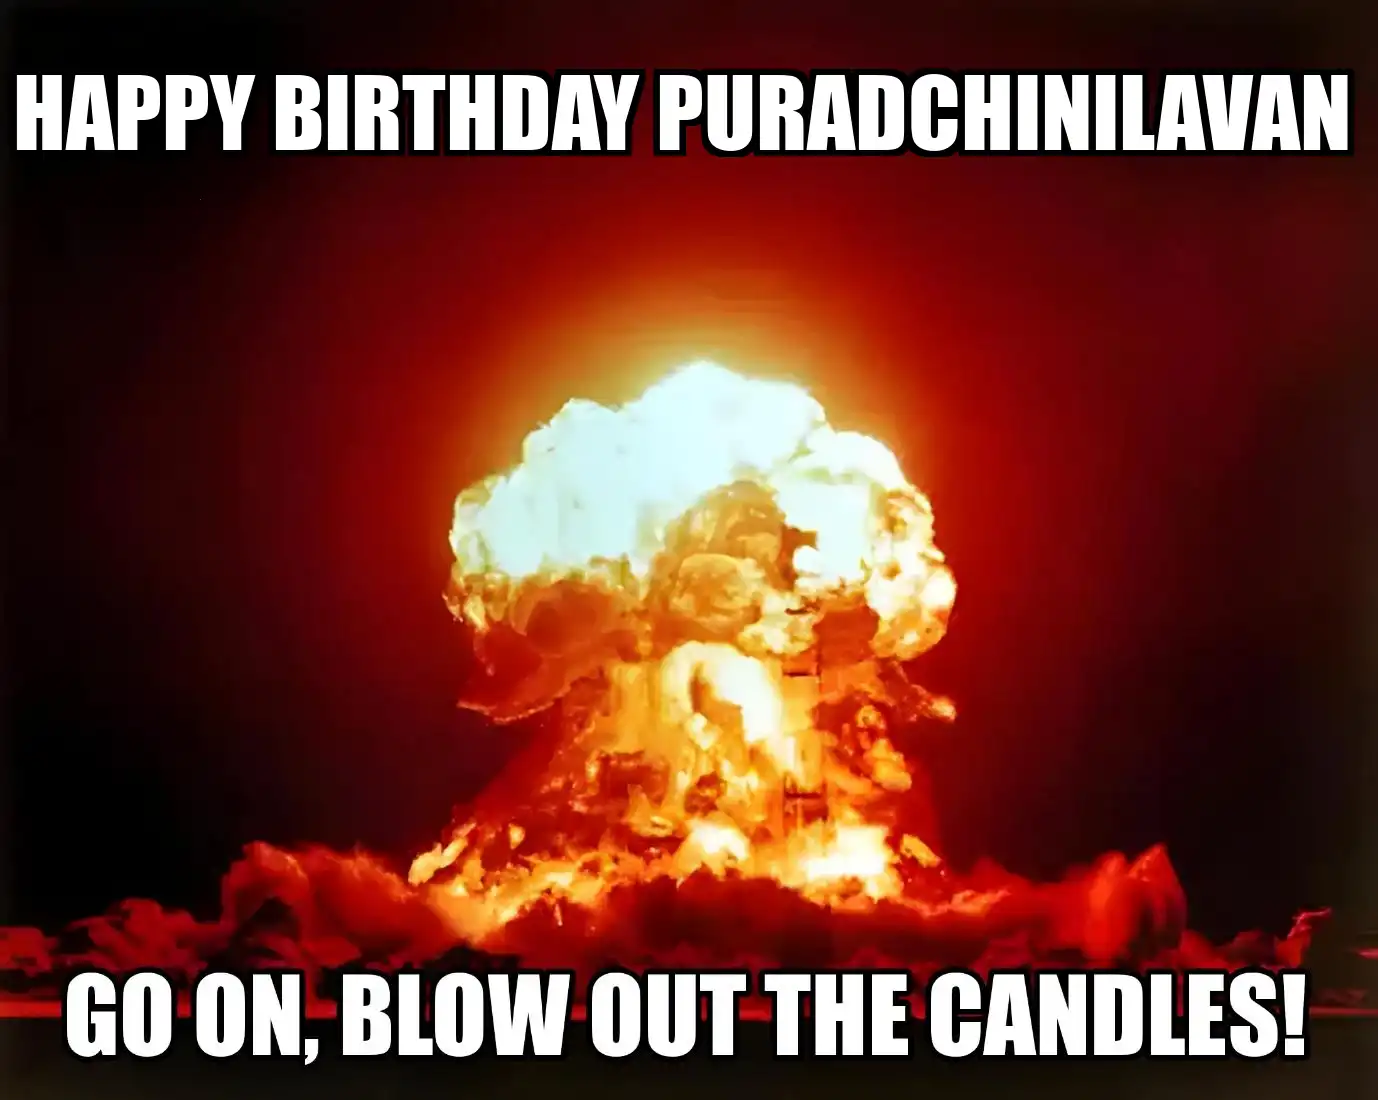 Happy Birthday Puradchinilavan Go On Blow Out The Candles Meme